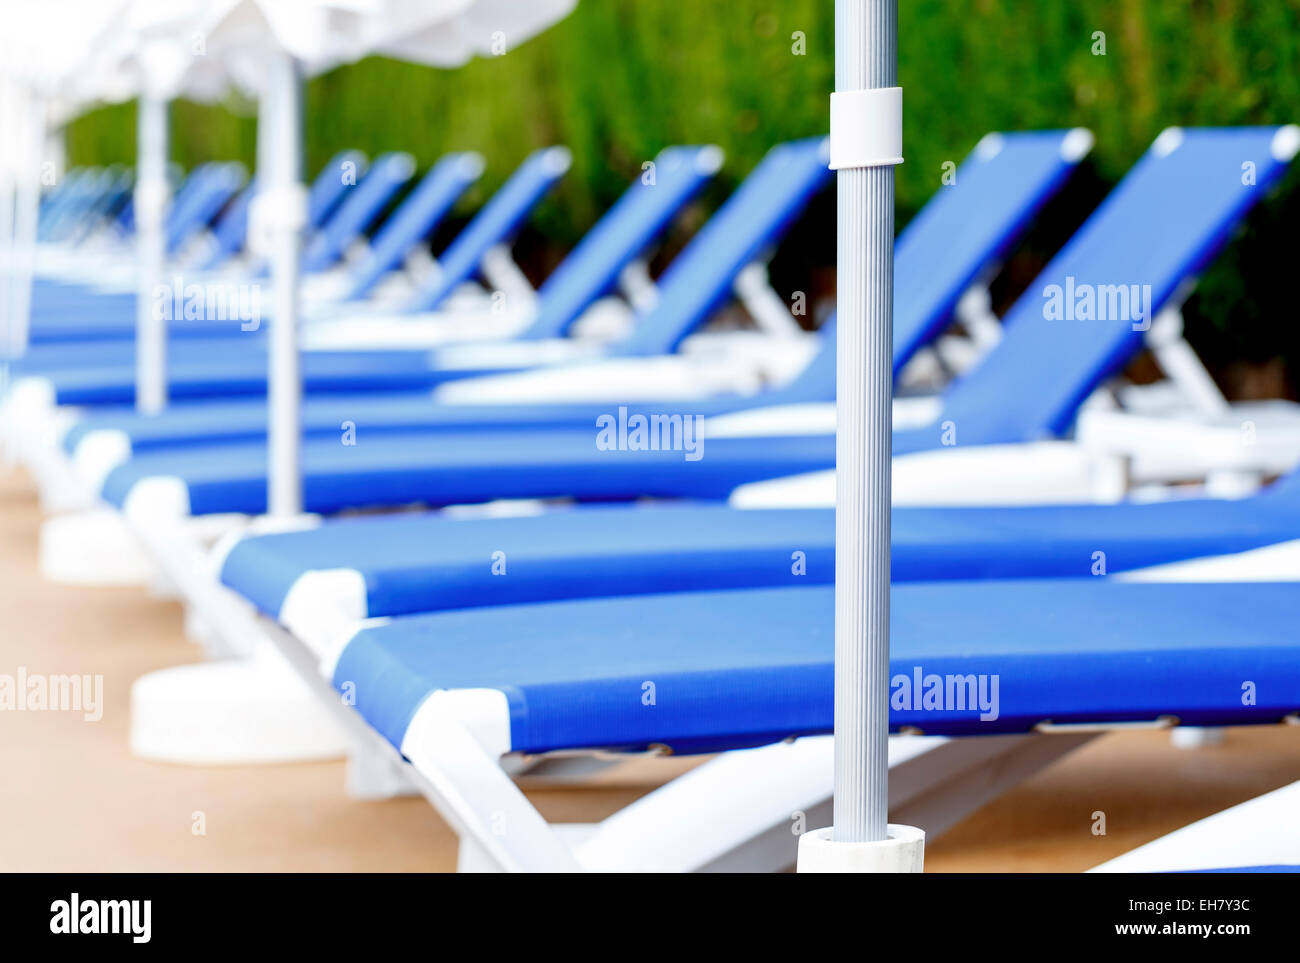 Sunloungers in a row Stock Photo